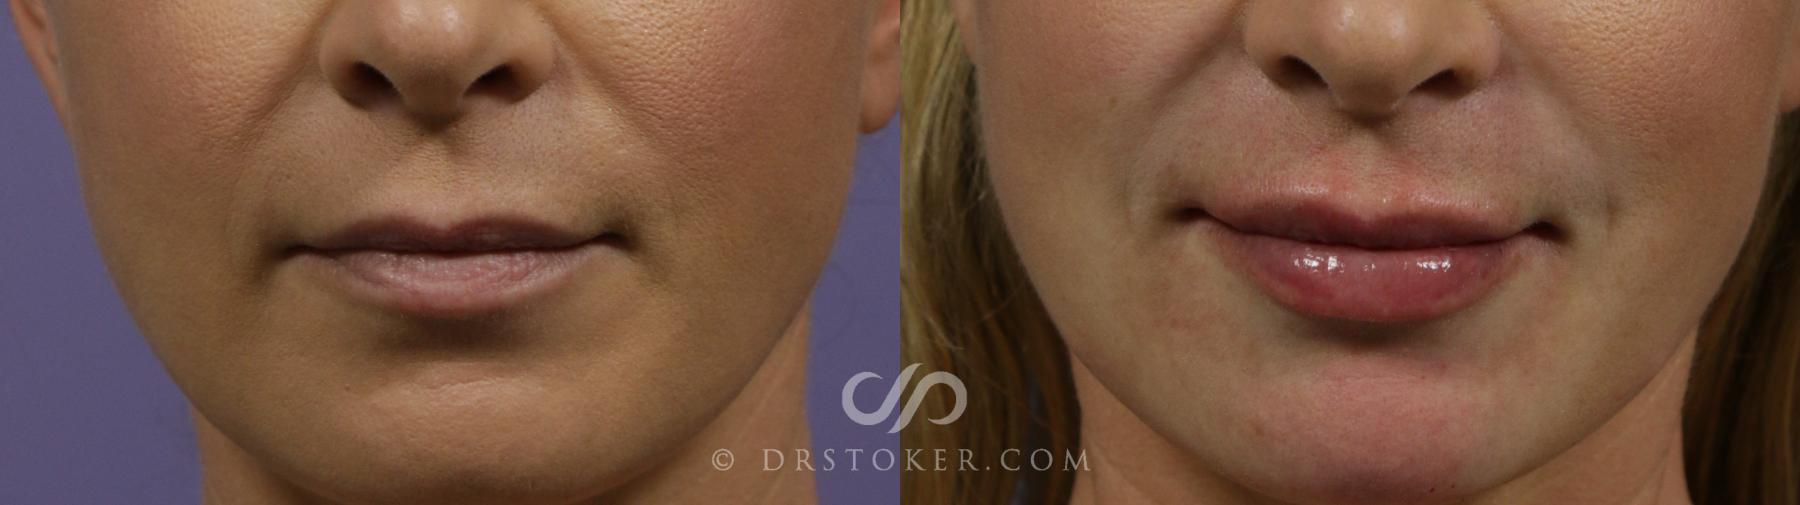 Before & After Lip Fillers/Augmentation Case 1872 Front View in Los Angeles, CA